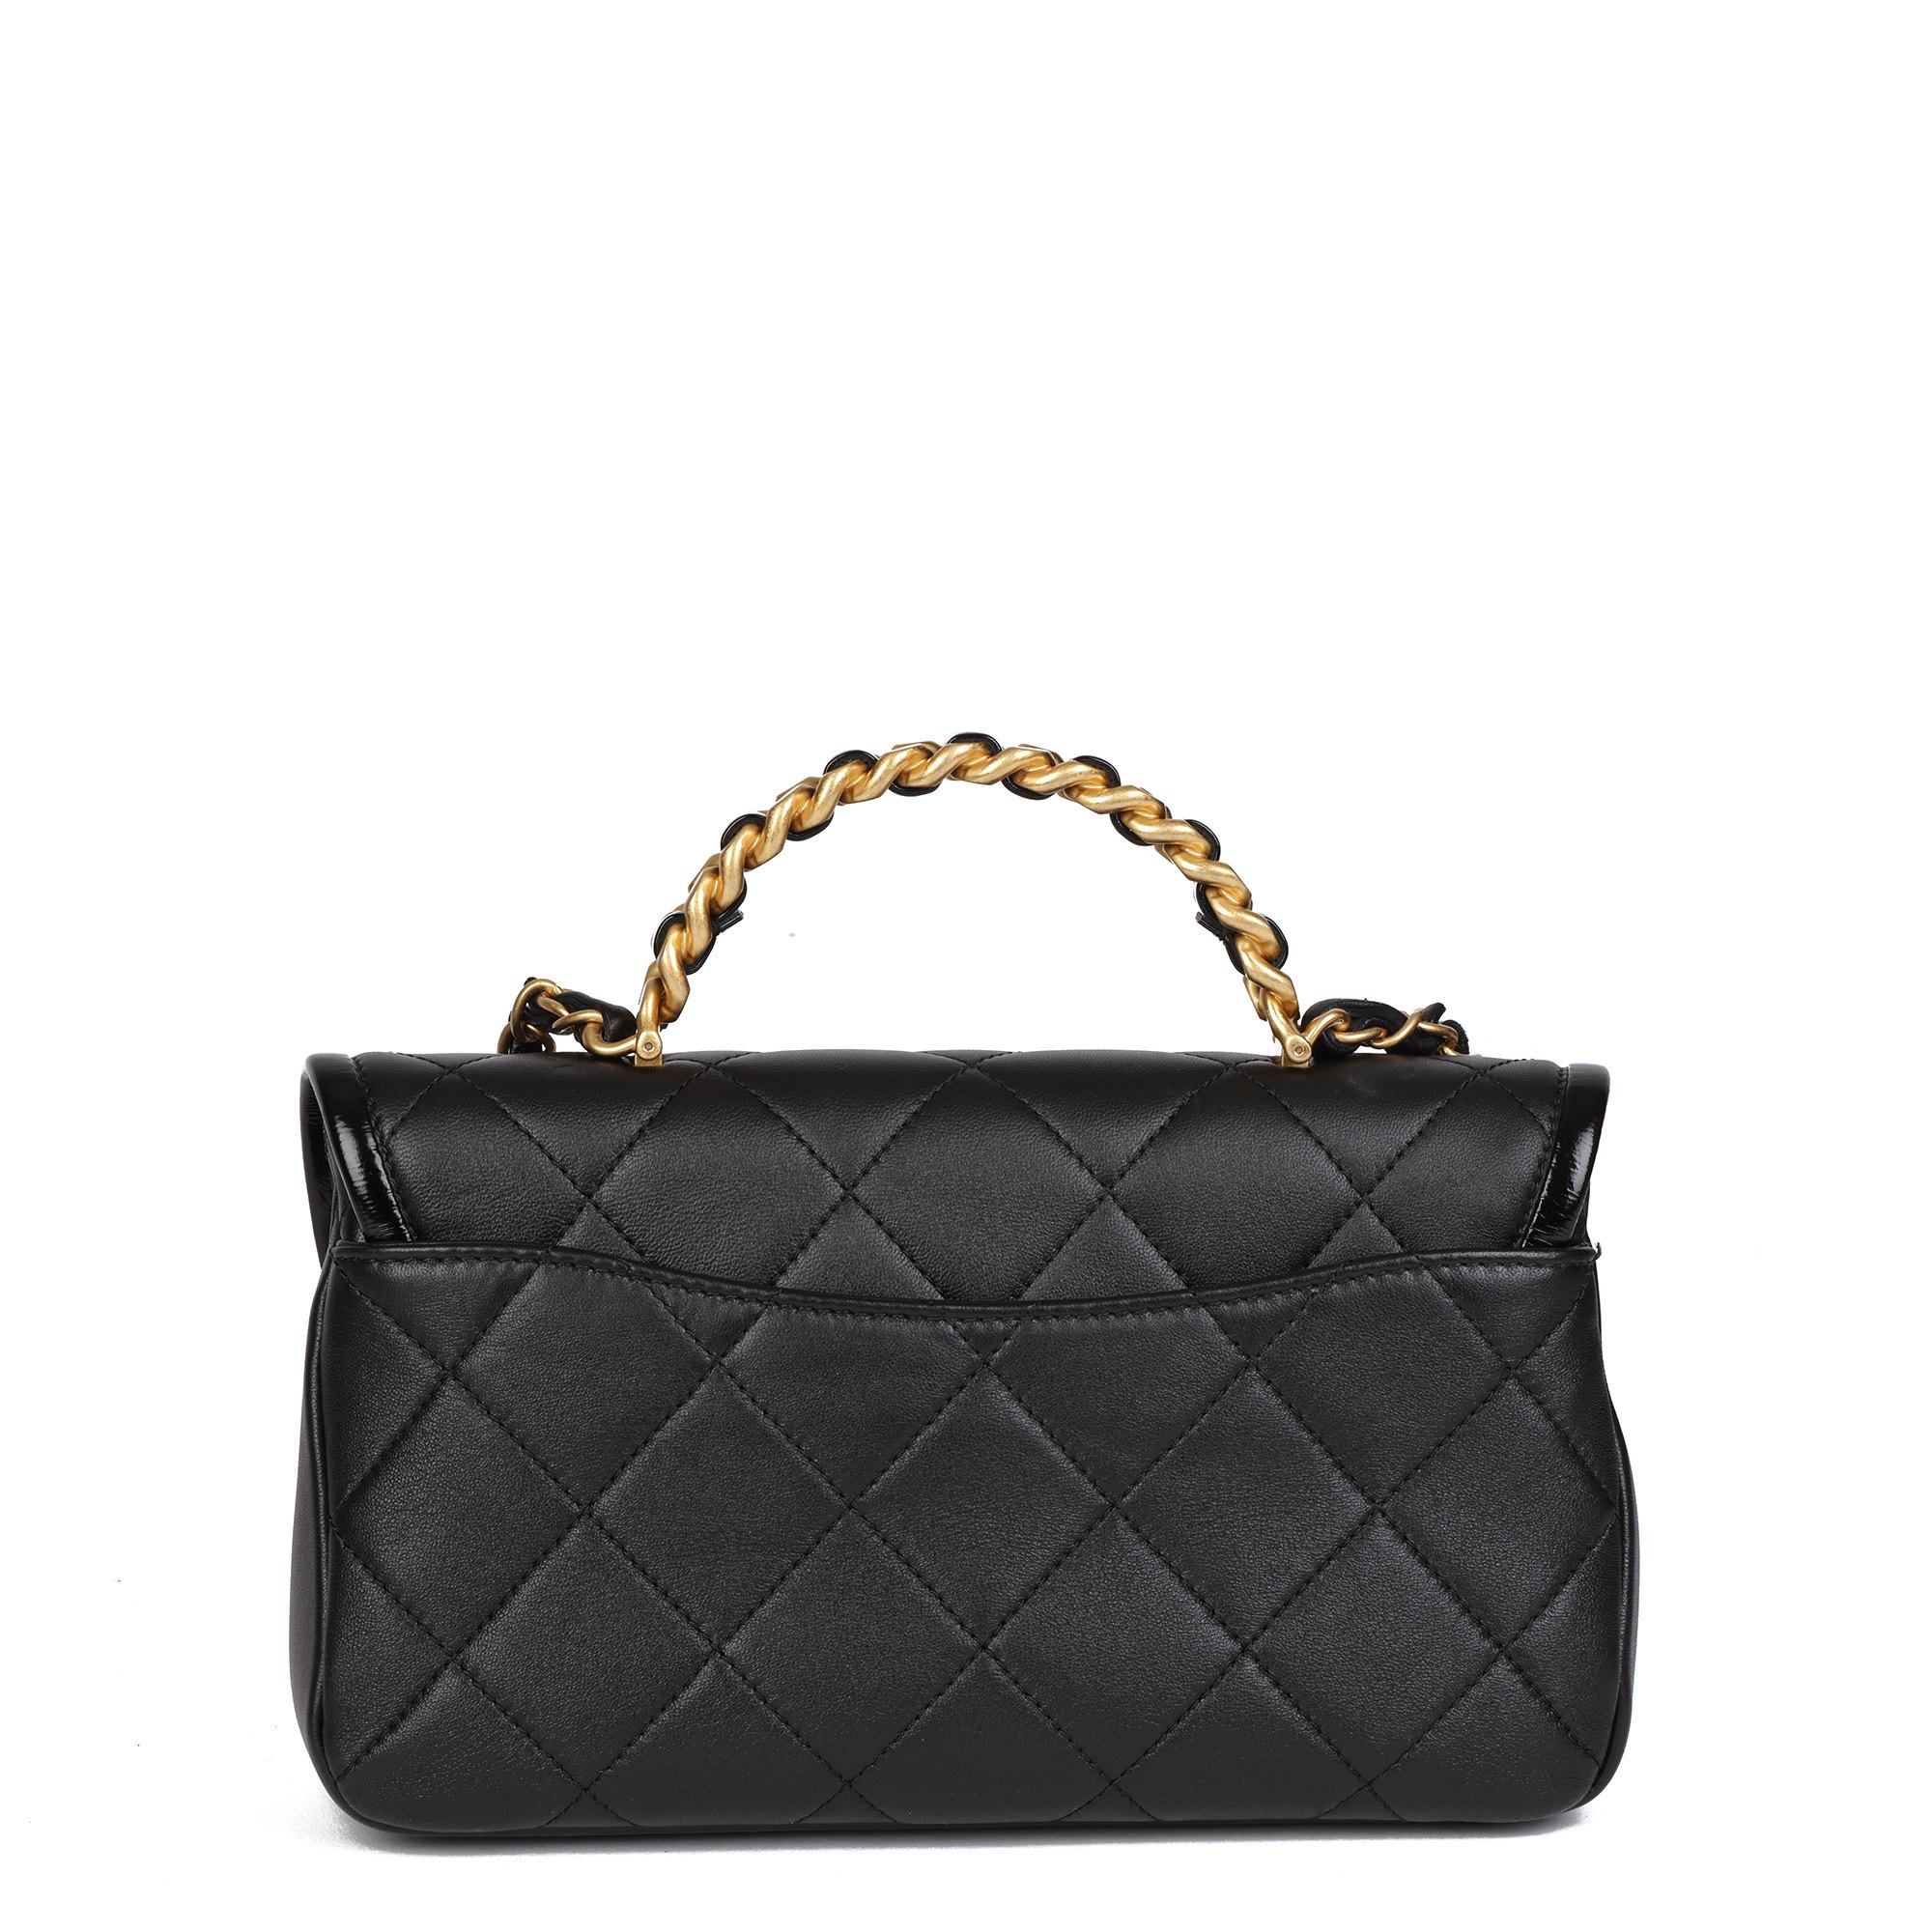 Chanel Black Quilted Lambskin Small Classic Top Handle Flap Bag